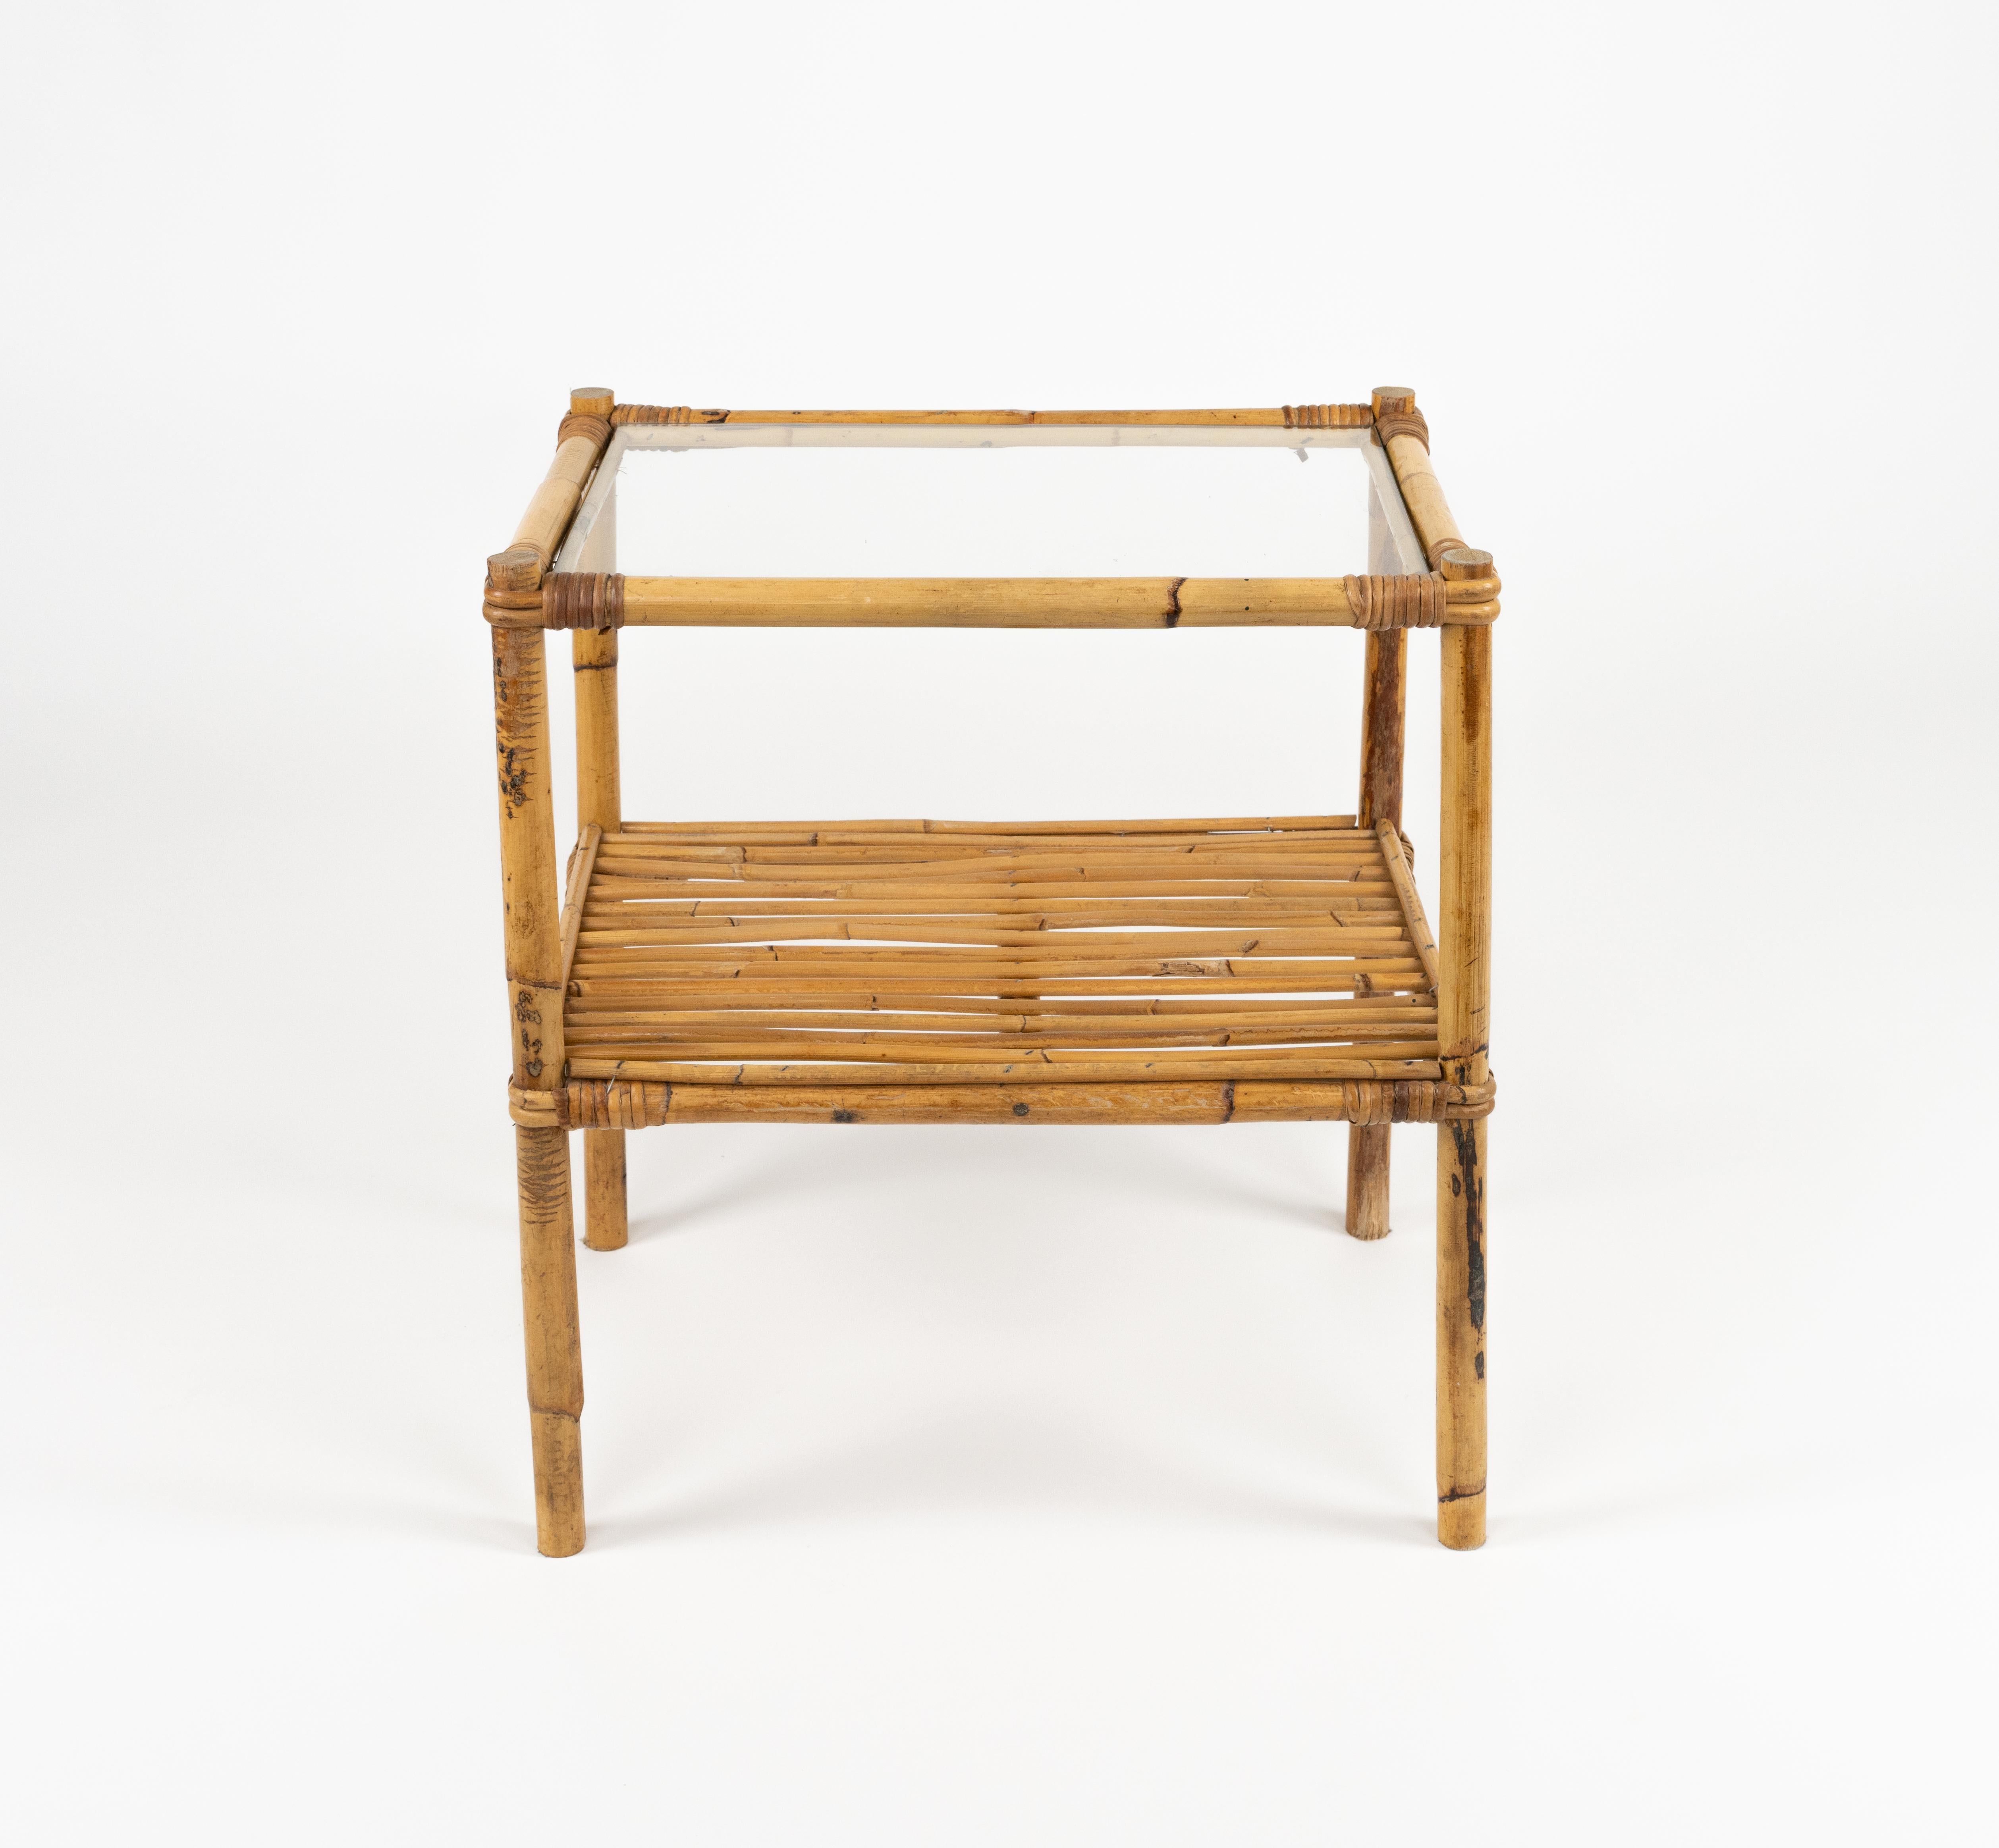 Italian Midcentury Side Table in Bamboo, Rattan and Glass, Italy 1970s For Sale